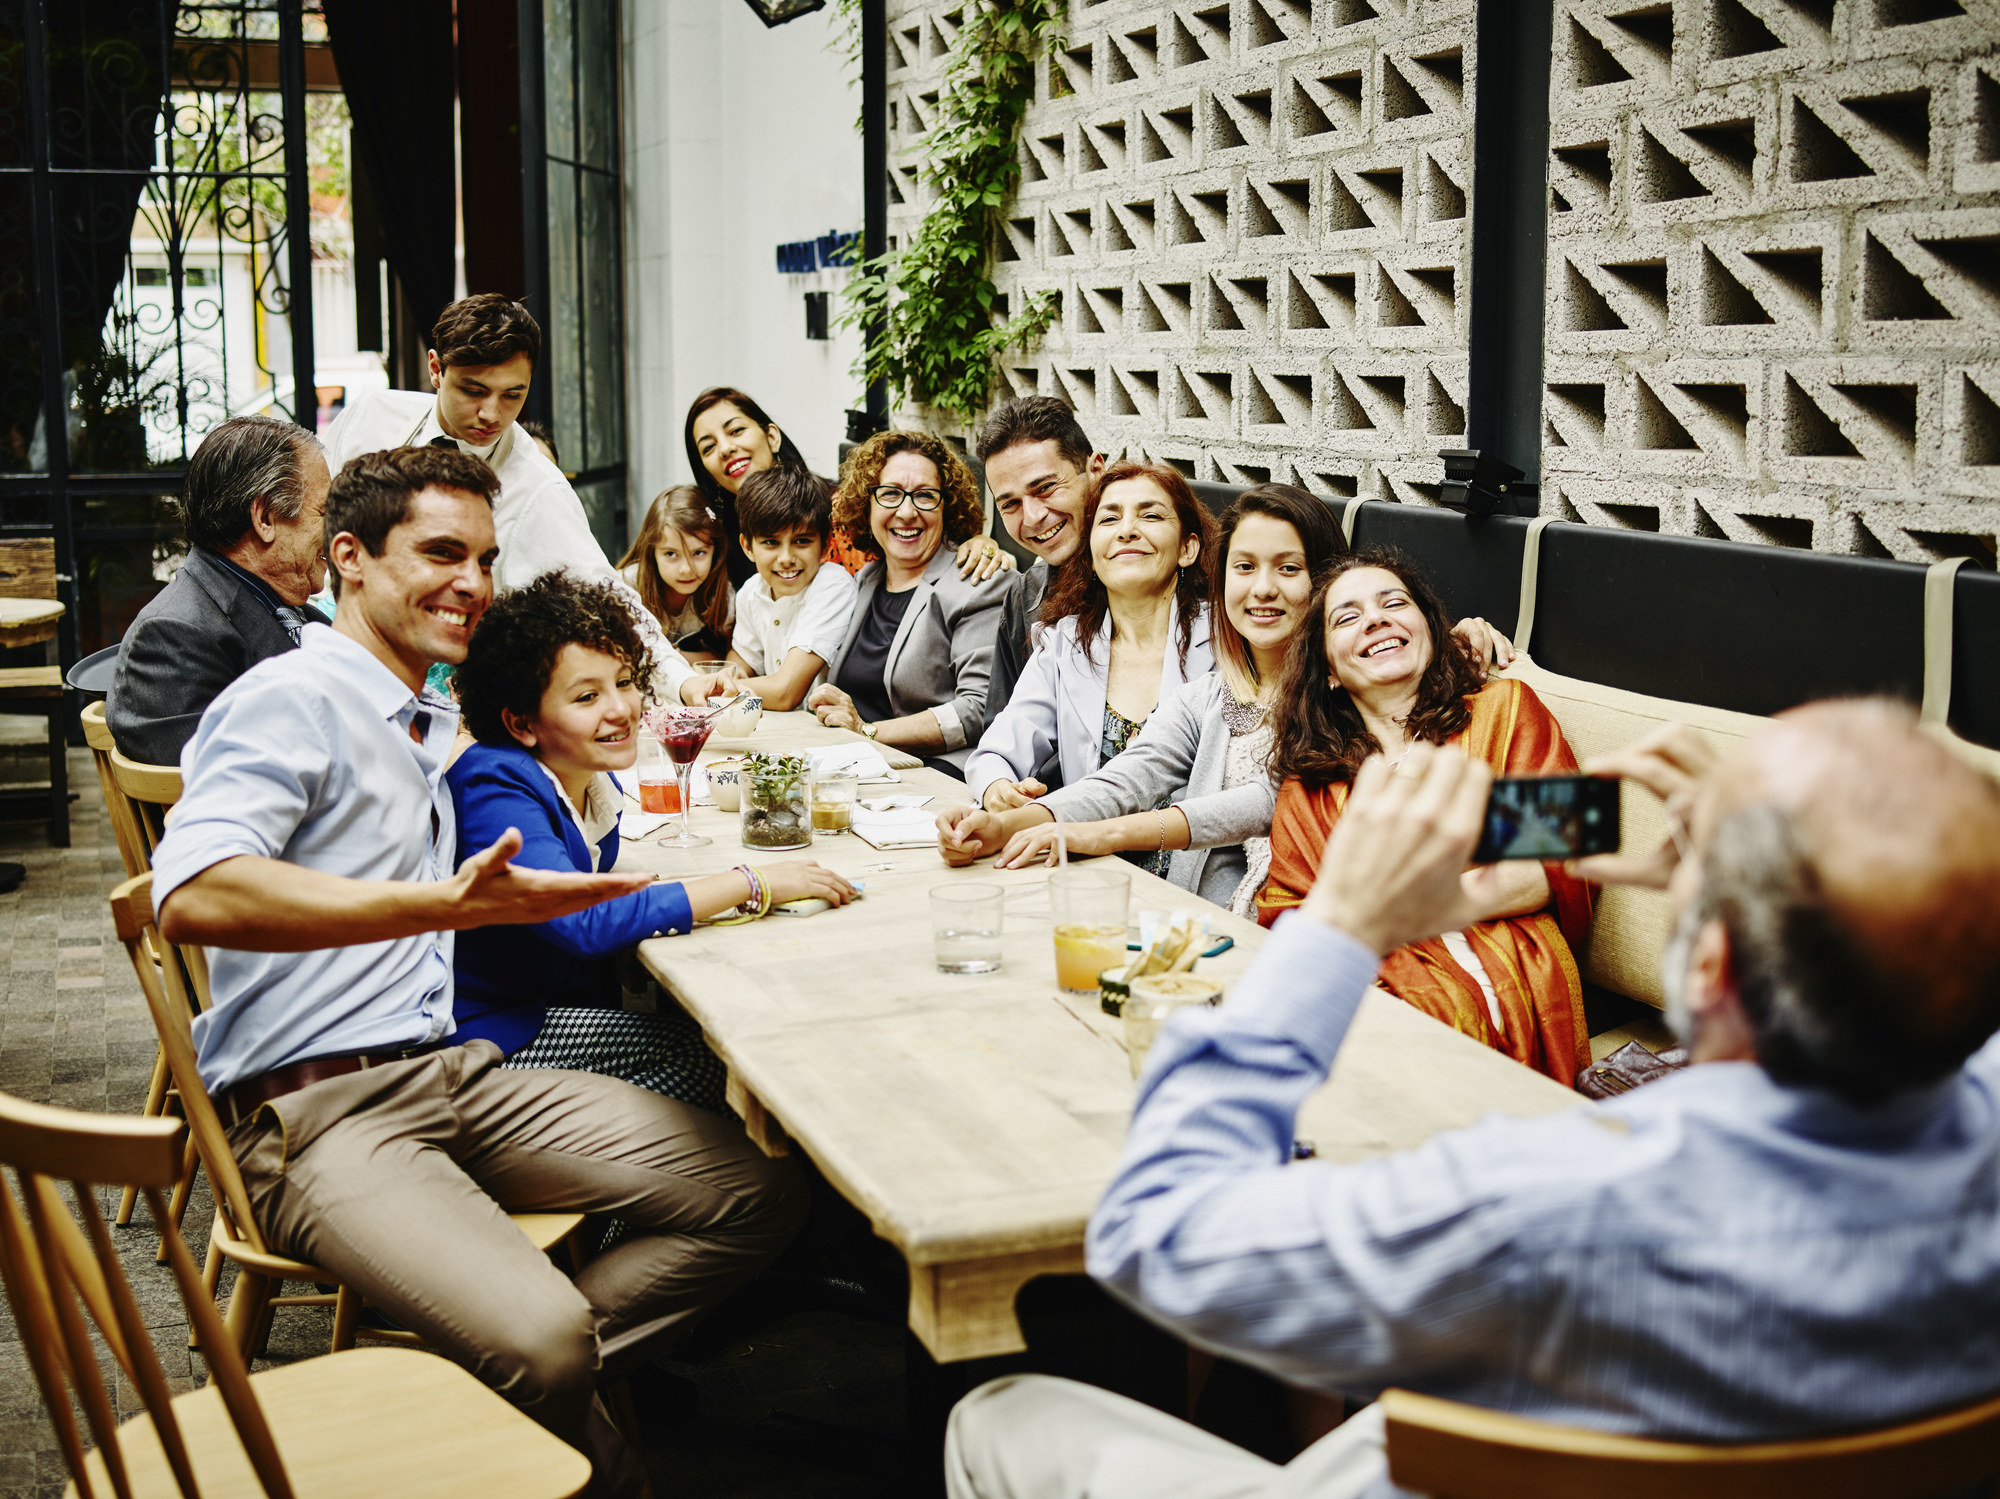 Man taking family portrait with smartphone during dinner party in restaurant